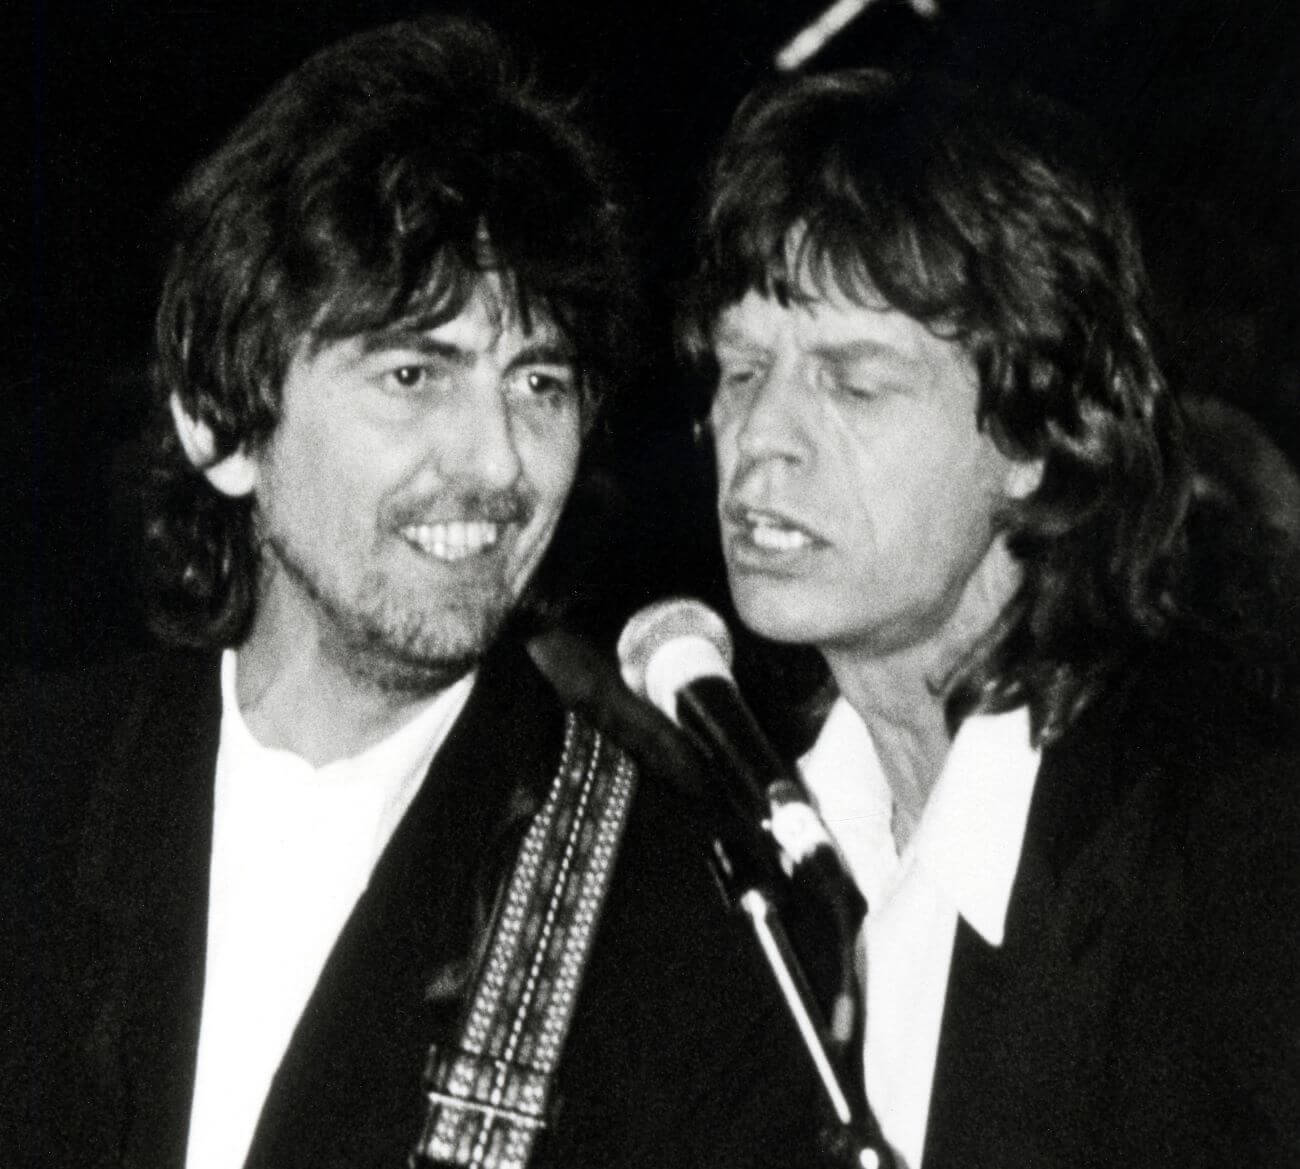 A black and white picture of George Harrison and Mick Jagger singing into the same microphone.